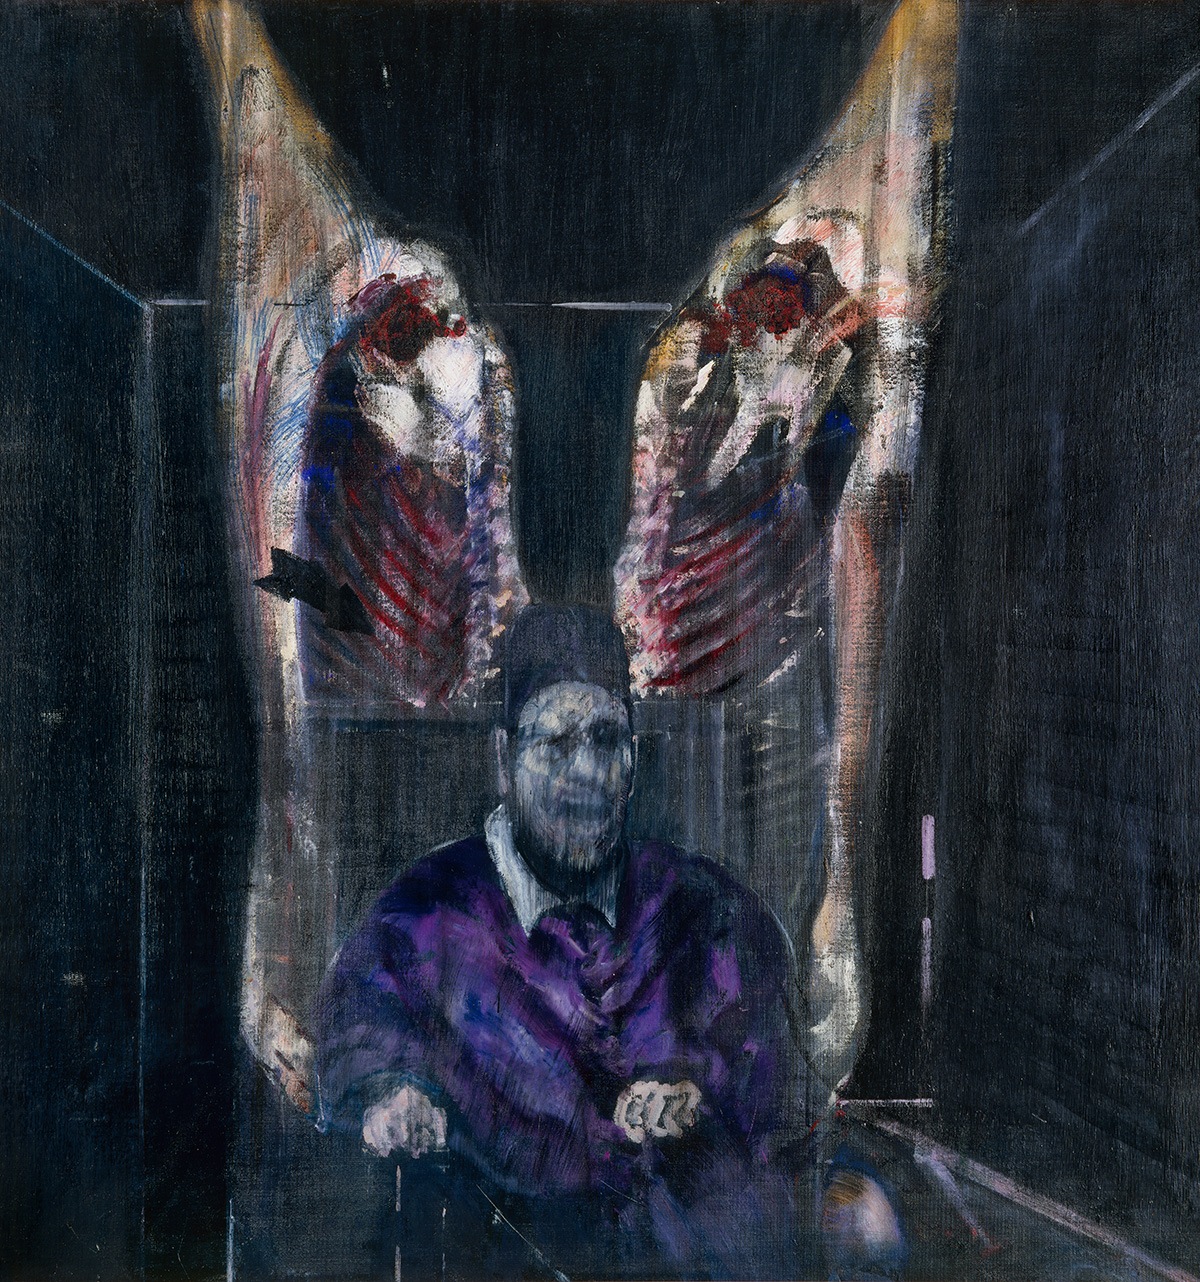 Figure with Meat, 1954. Oil on canvas. CR number 54-14. © The Estate of Francis Bacon / DACS London 2020. All rights reserved.